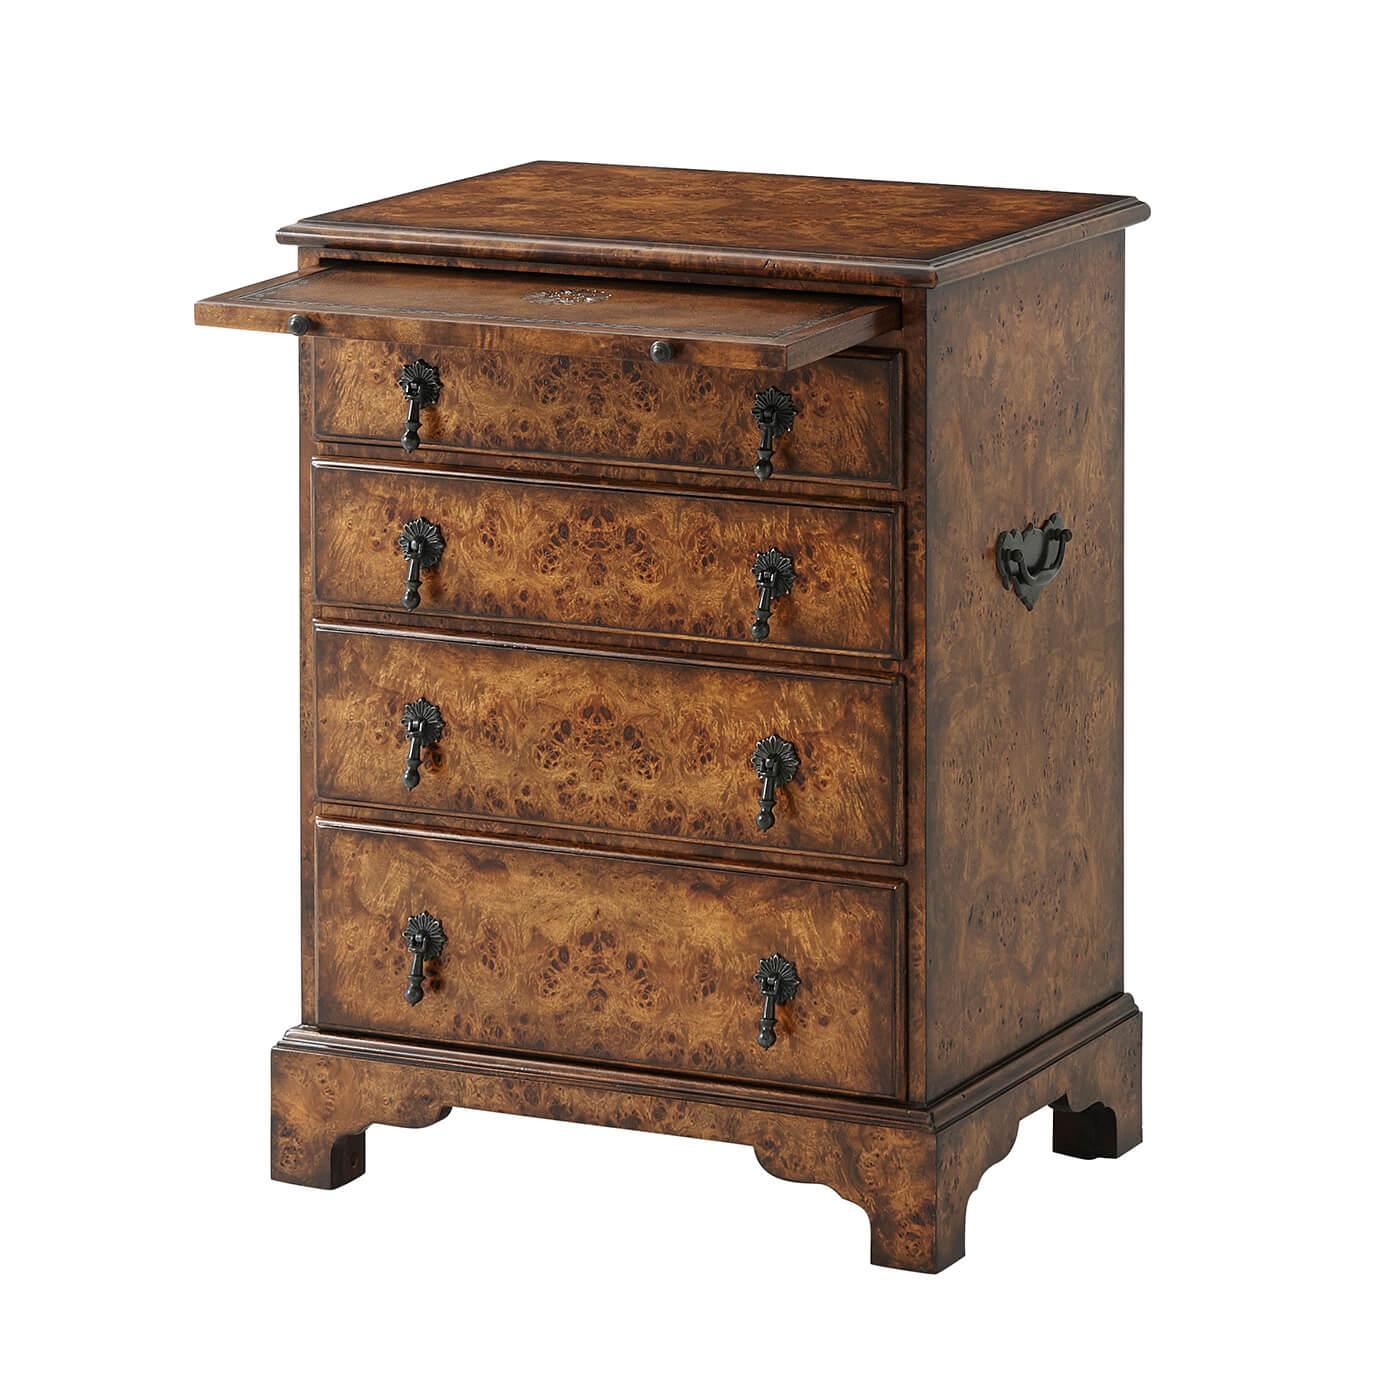 An English Georgian style poplar burl bedside chest, the rectangular molded edge top with a leather inset slide and four graduated drawers, on bracket feet. 

Dimensions: 21